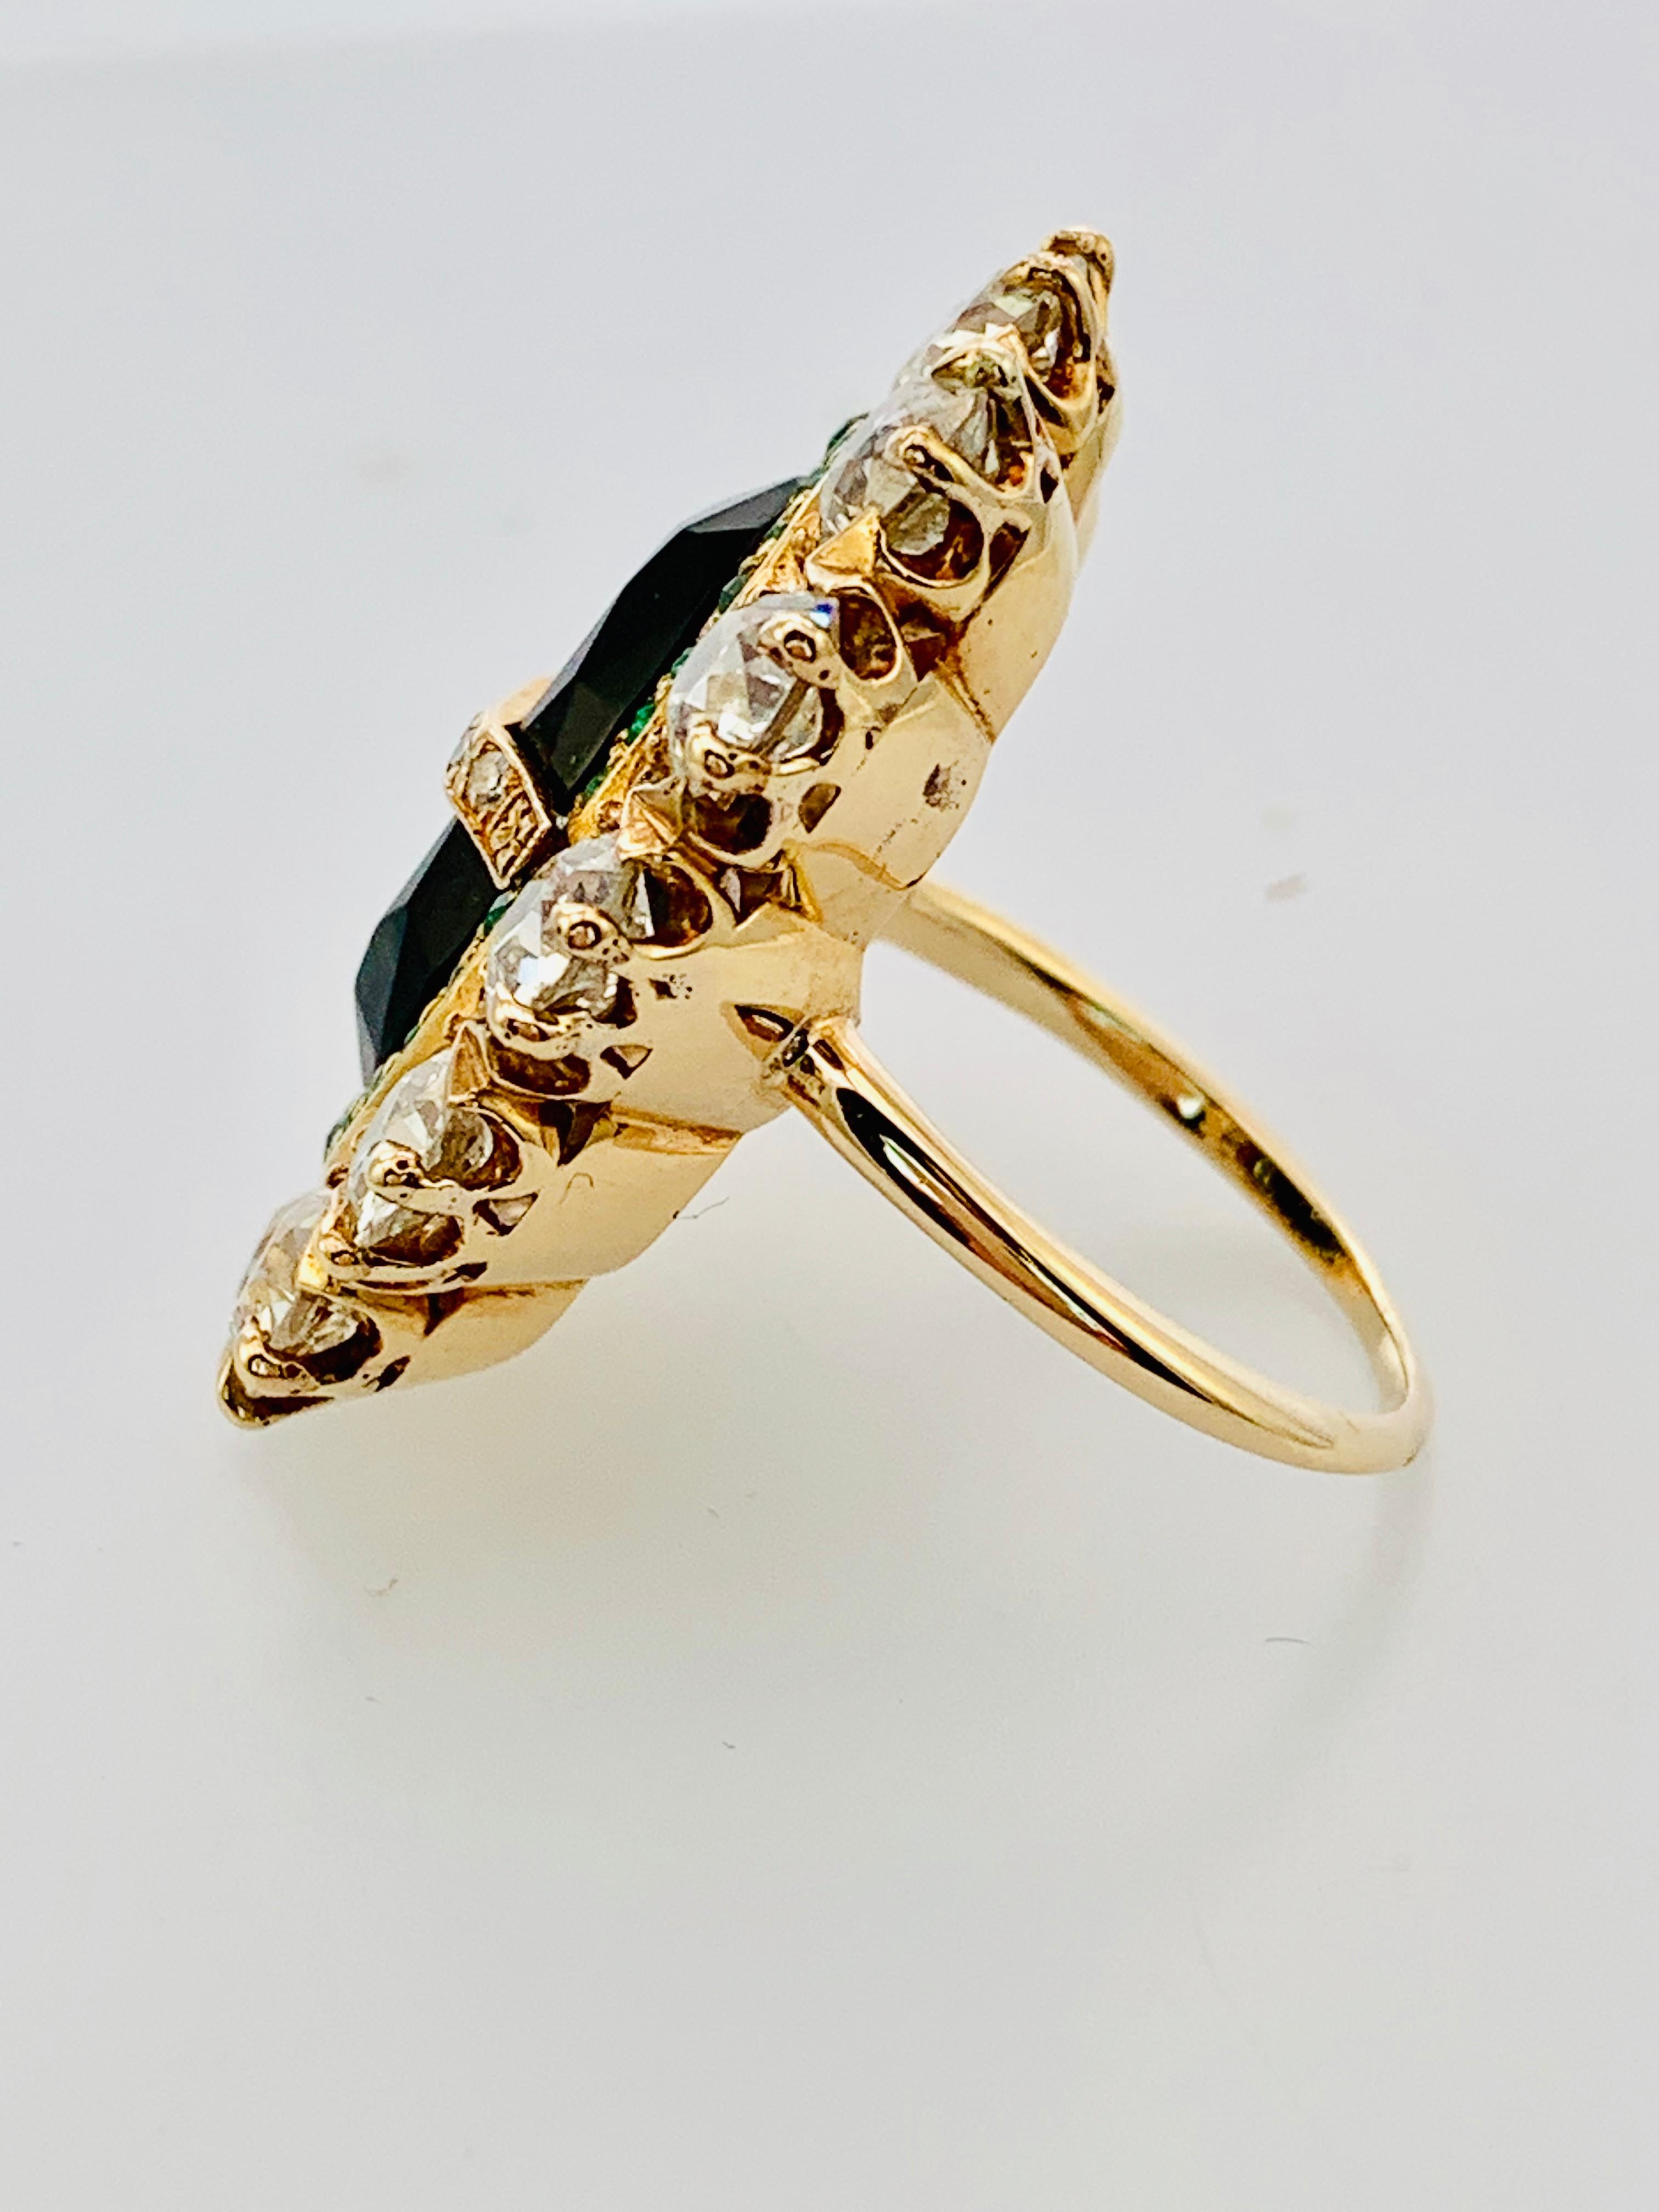 Gorgeous Late Victorian Era Ring!  Made in 14K yellow Gold, this piece features stunning 16 by 9mm Oval Onyx at the center that is surrounded by a rim of 28 round emeralds! The onyx is also crossed by a strip of six small diamonds. Then there is a